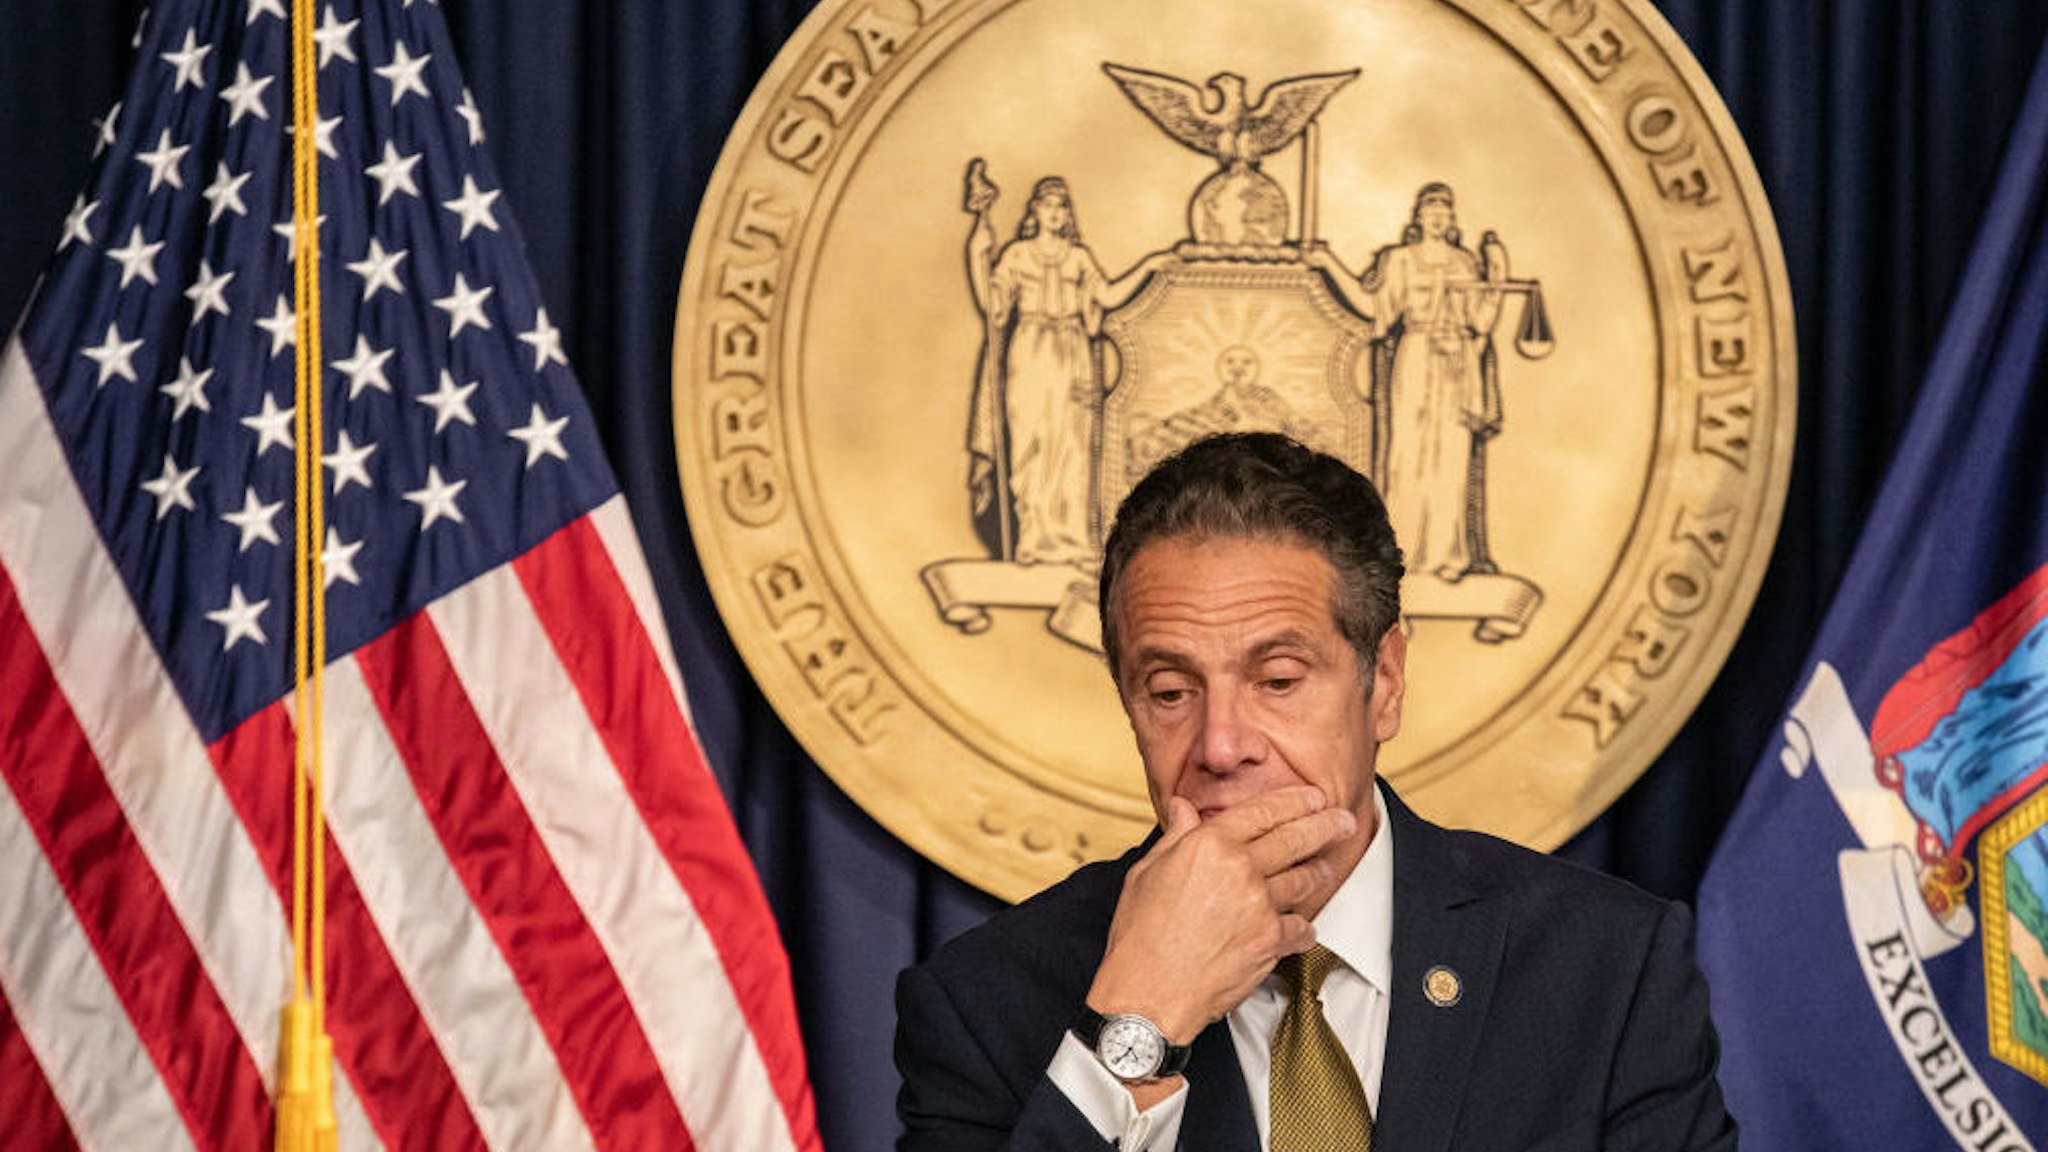 Andrew Cuomo, governor of New York, pauses while speaking during a news conference in New York, U.S., on Monday, Oct. 5, 2020. Governor Cuomo said New York City public and private schools in viral hot spots must close Tuesday, and he threatened to shut religious institutions if members don’t follow rules about masks and social distancing.